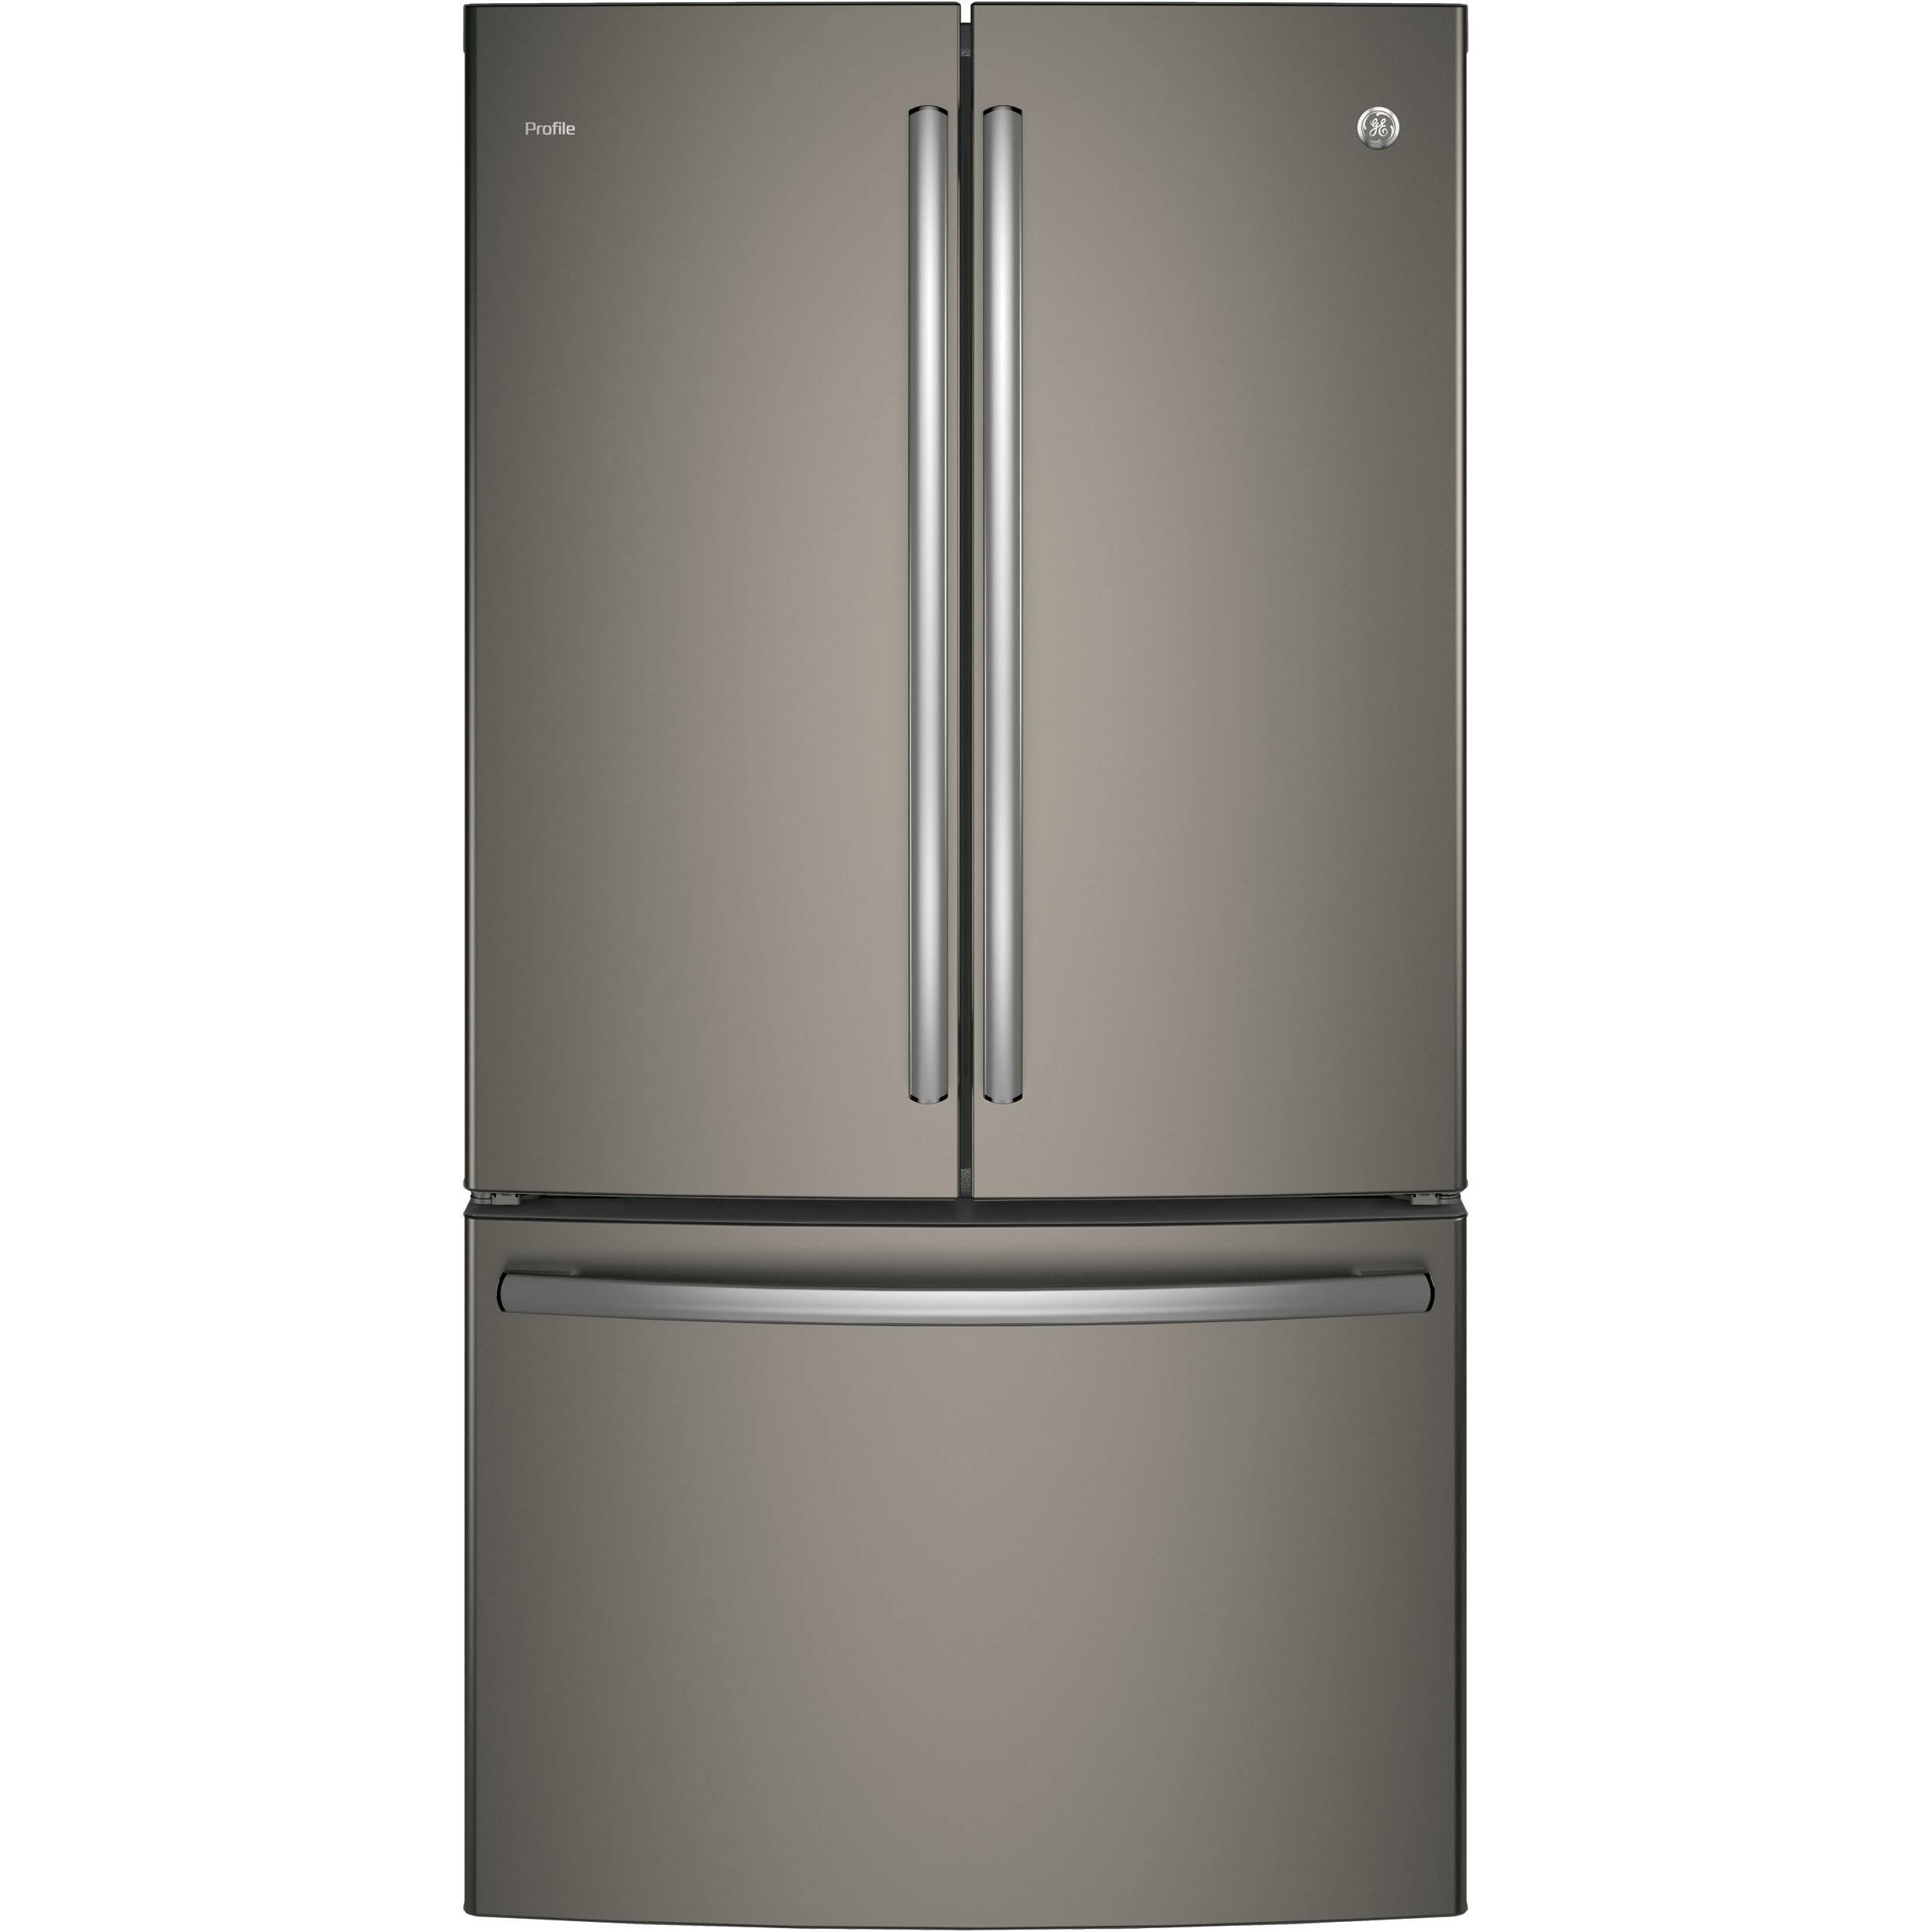 GE Profile 36-inch, 23.1 cu. ft. Counter-Depth French 3-Door Refrigerator with Ice and Water PWE23KMKES